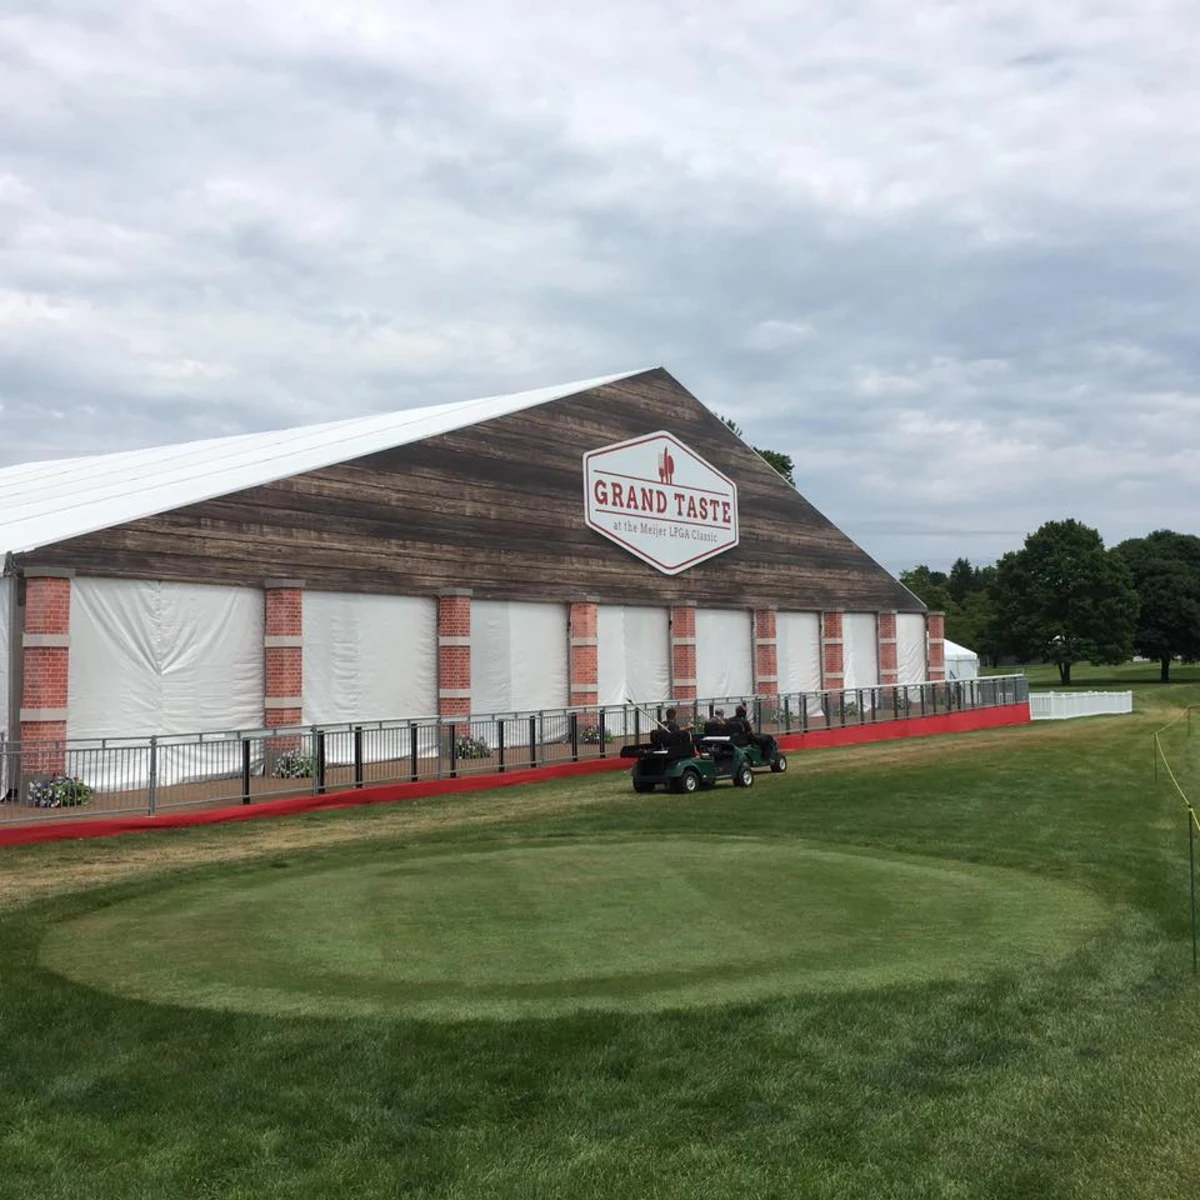 Be Sure to Check out The Grand Taste at the Meijer LPGA Classic